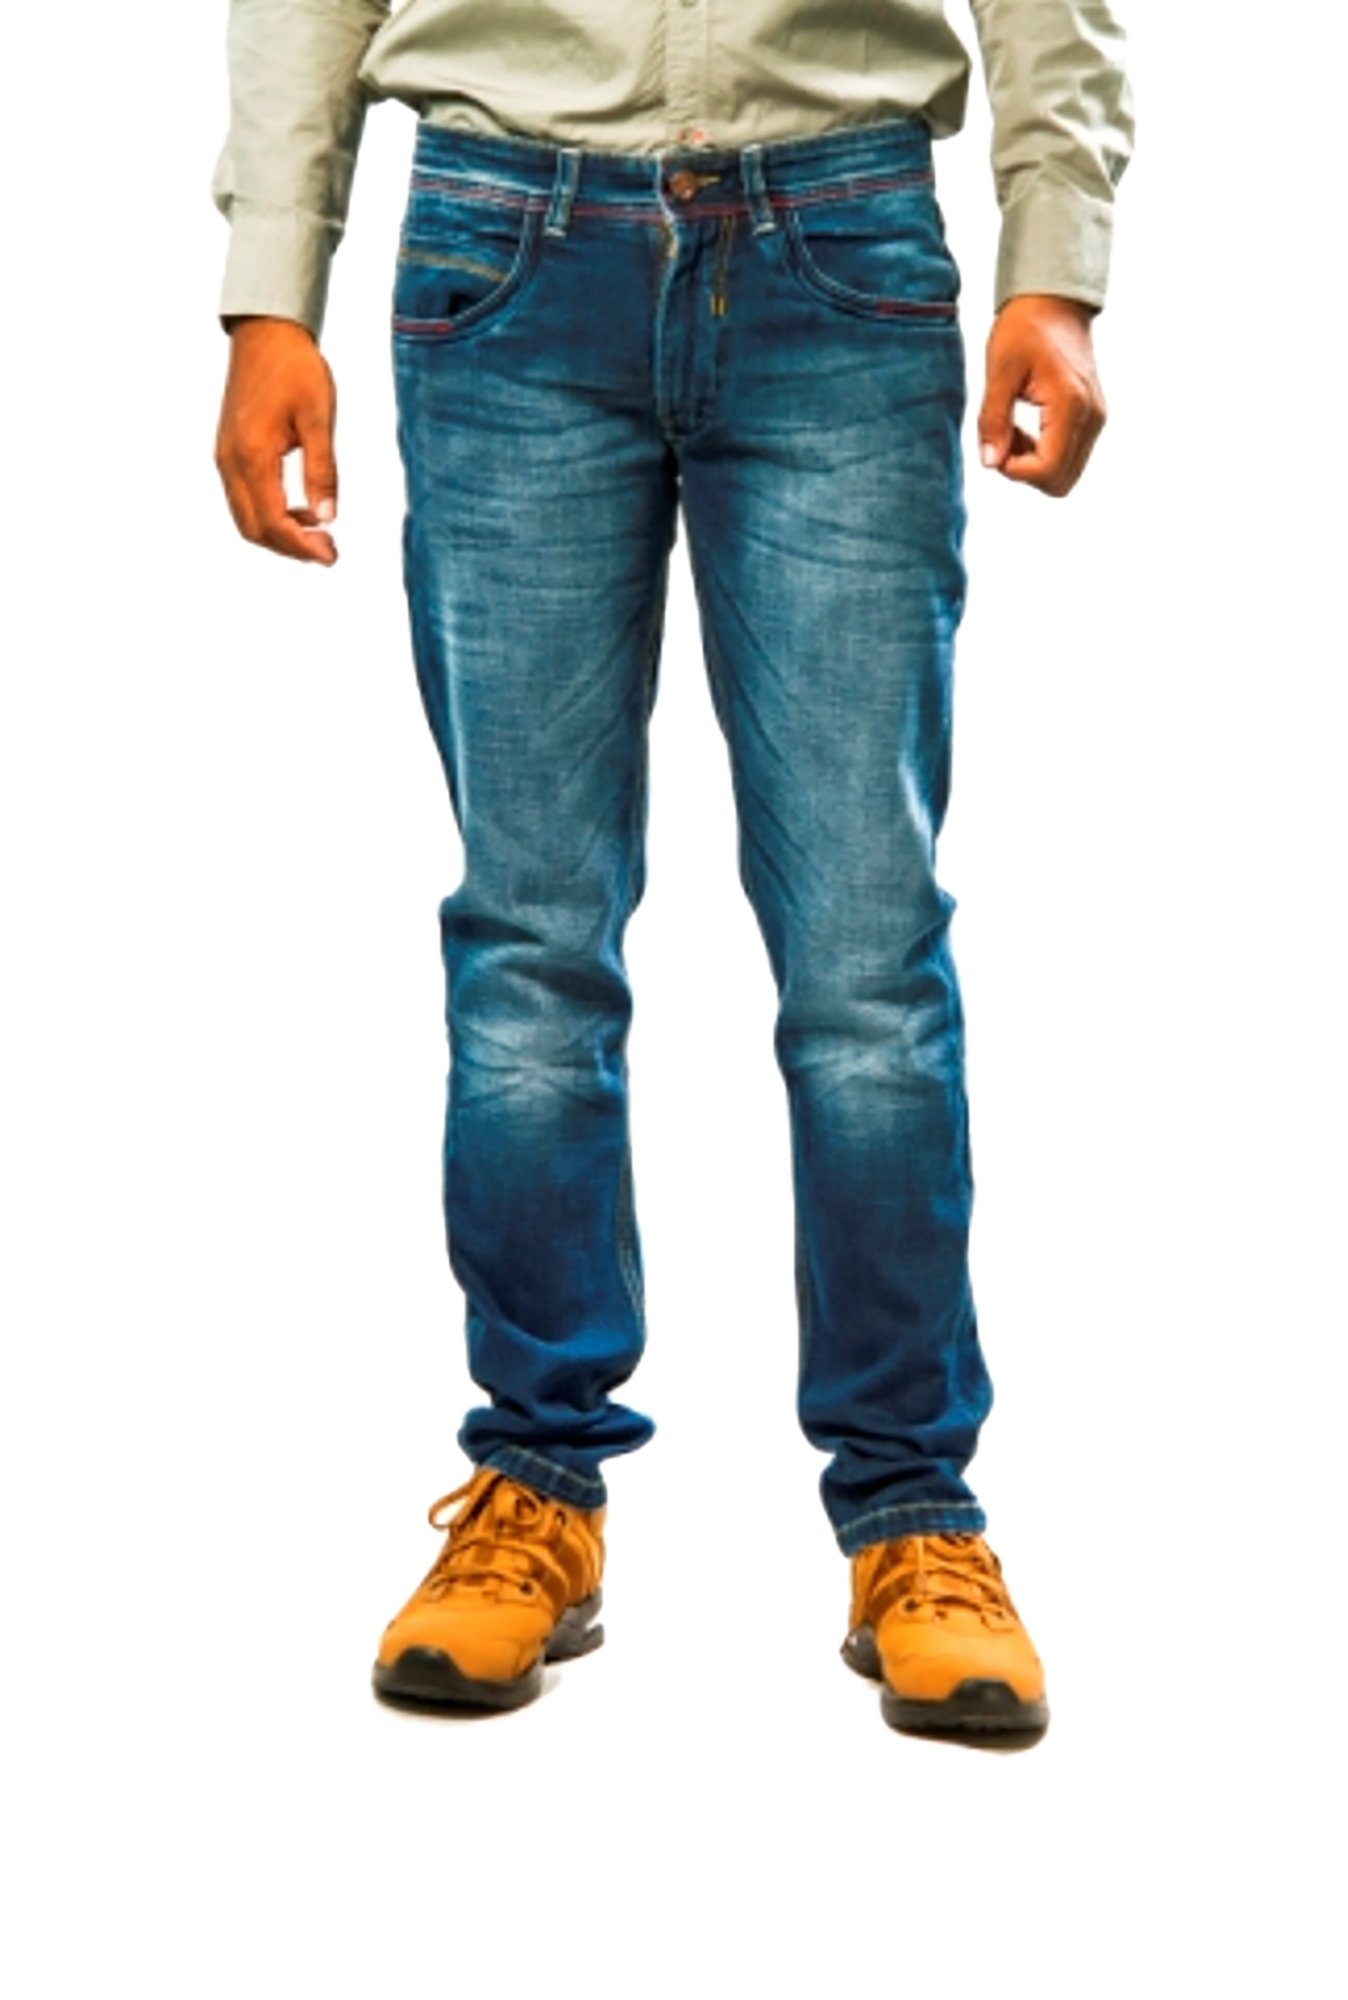 red chief jeans price